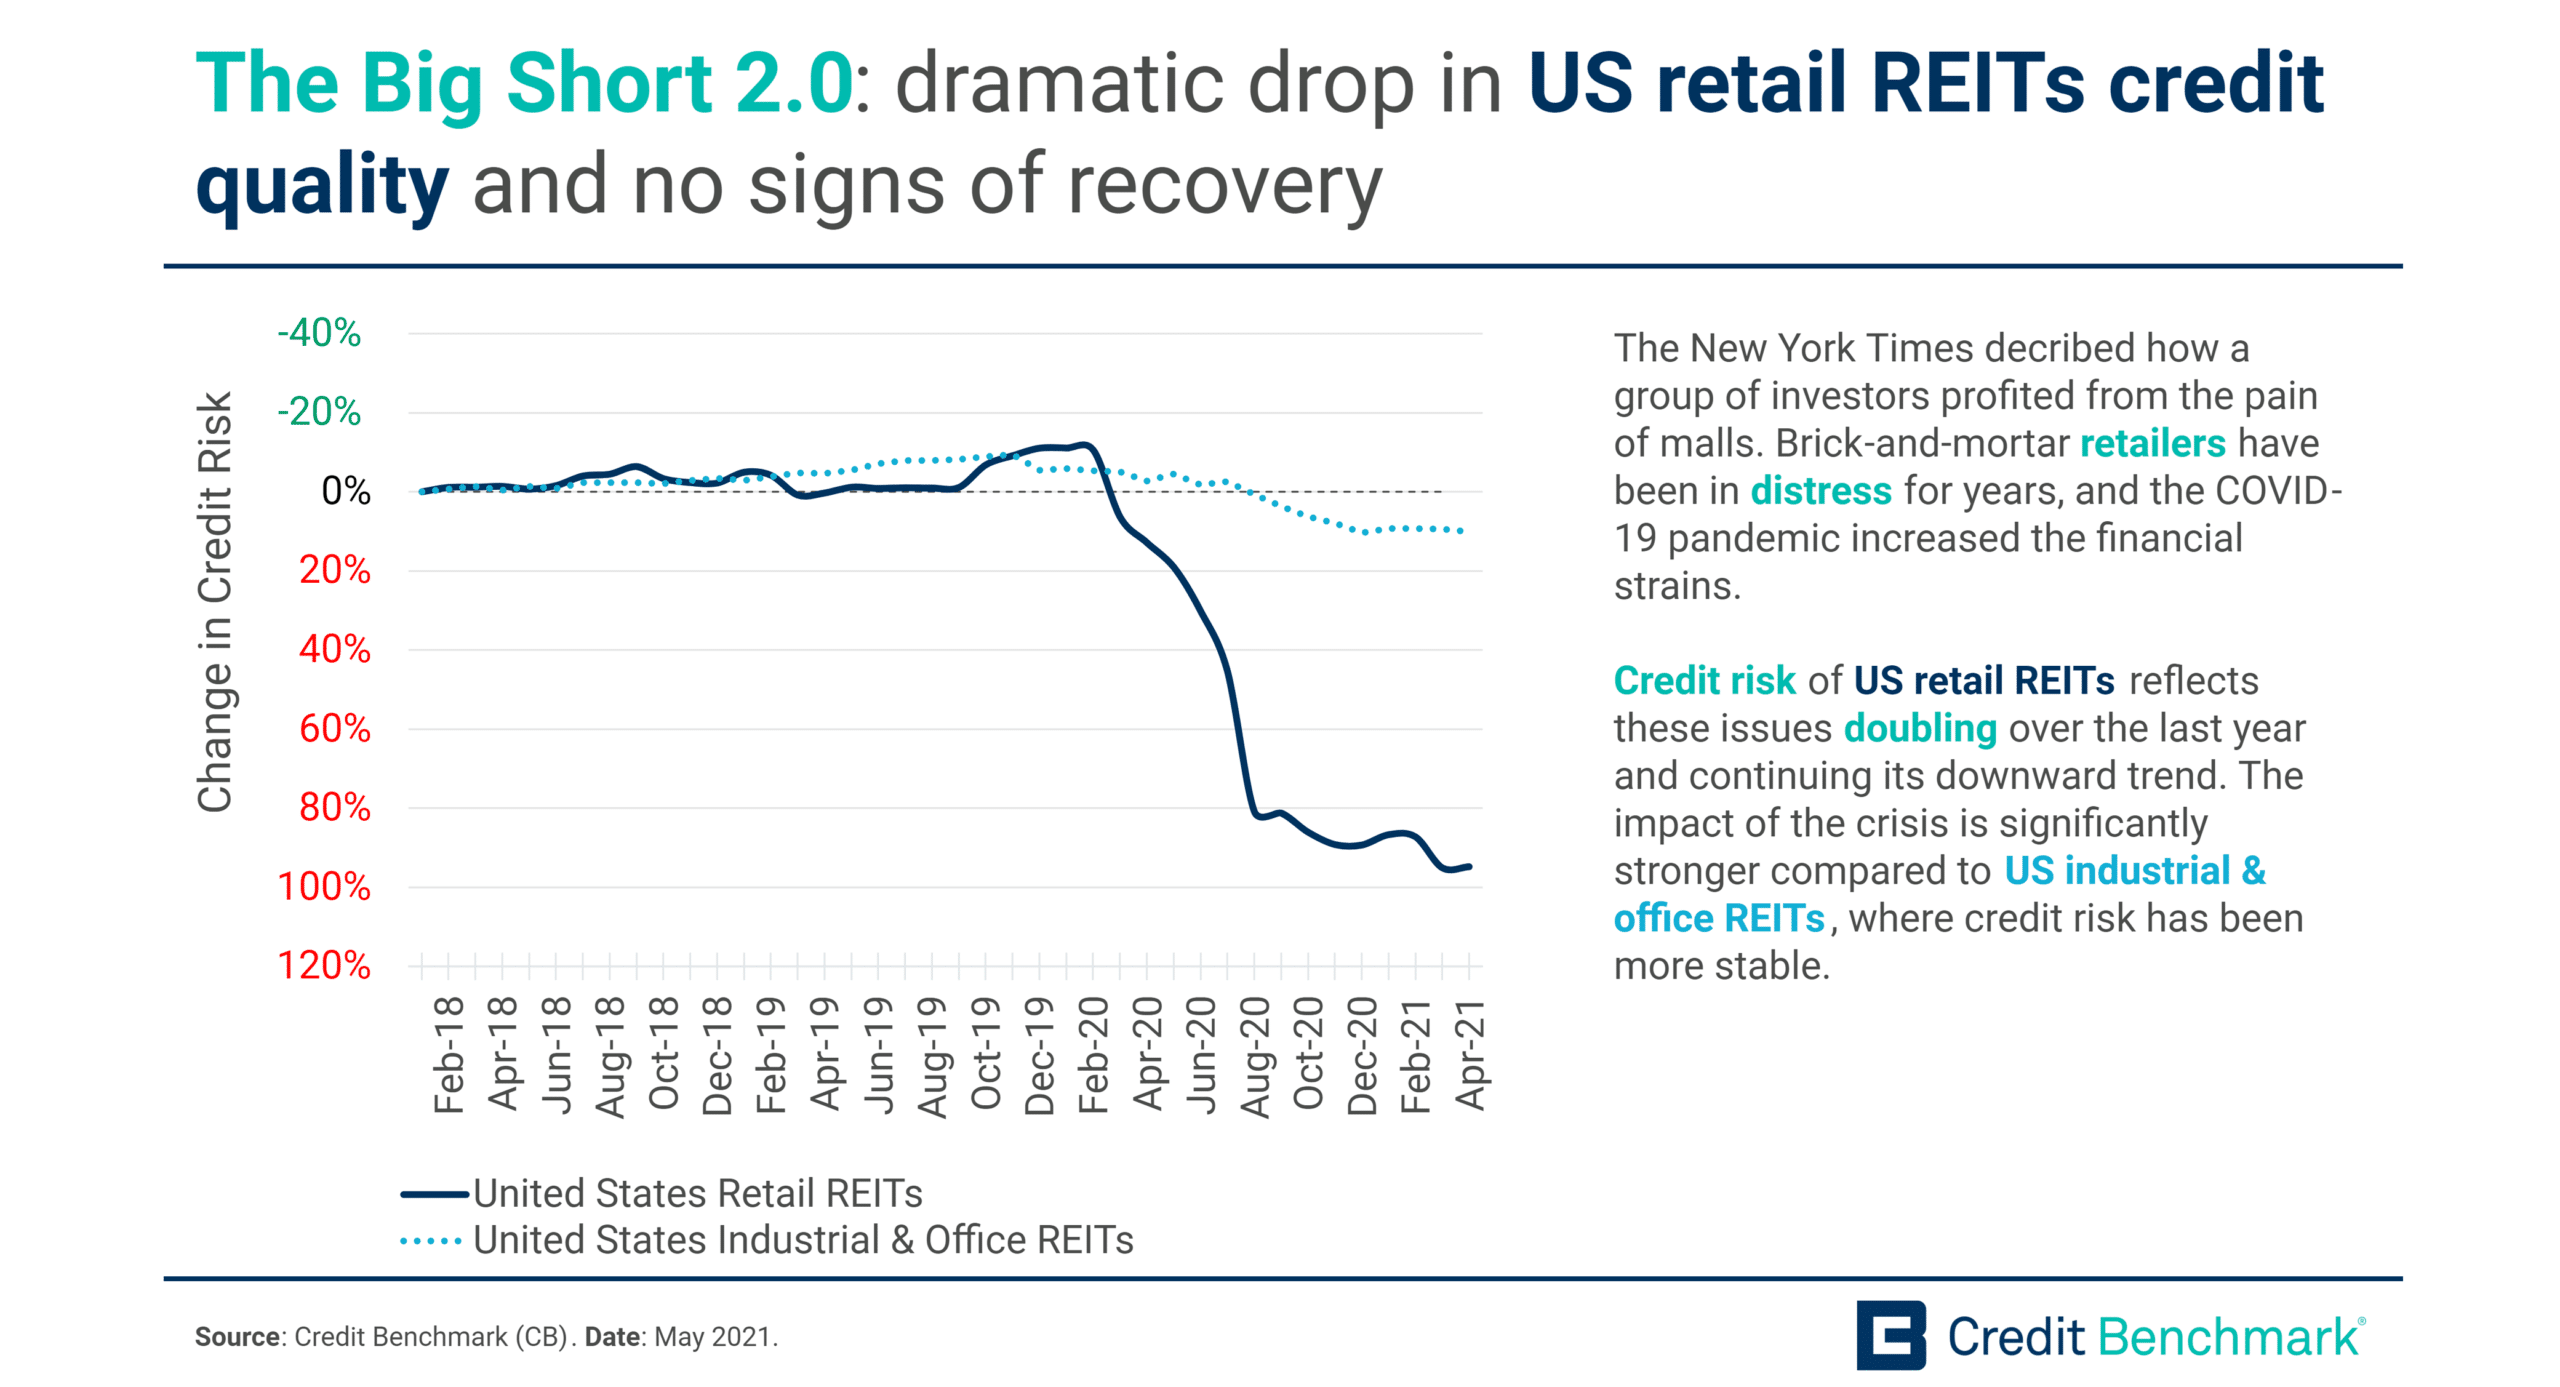 The Big Short 2.0 : dramatic drop in US retail REITs credit quality and no signs of recovery